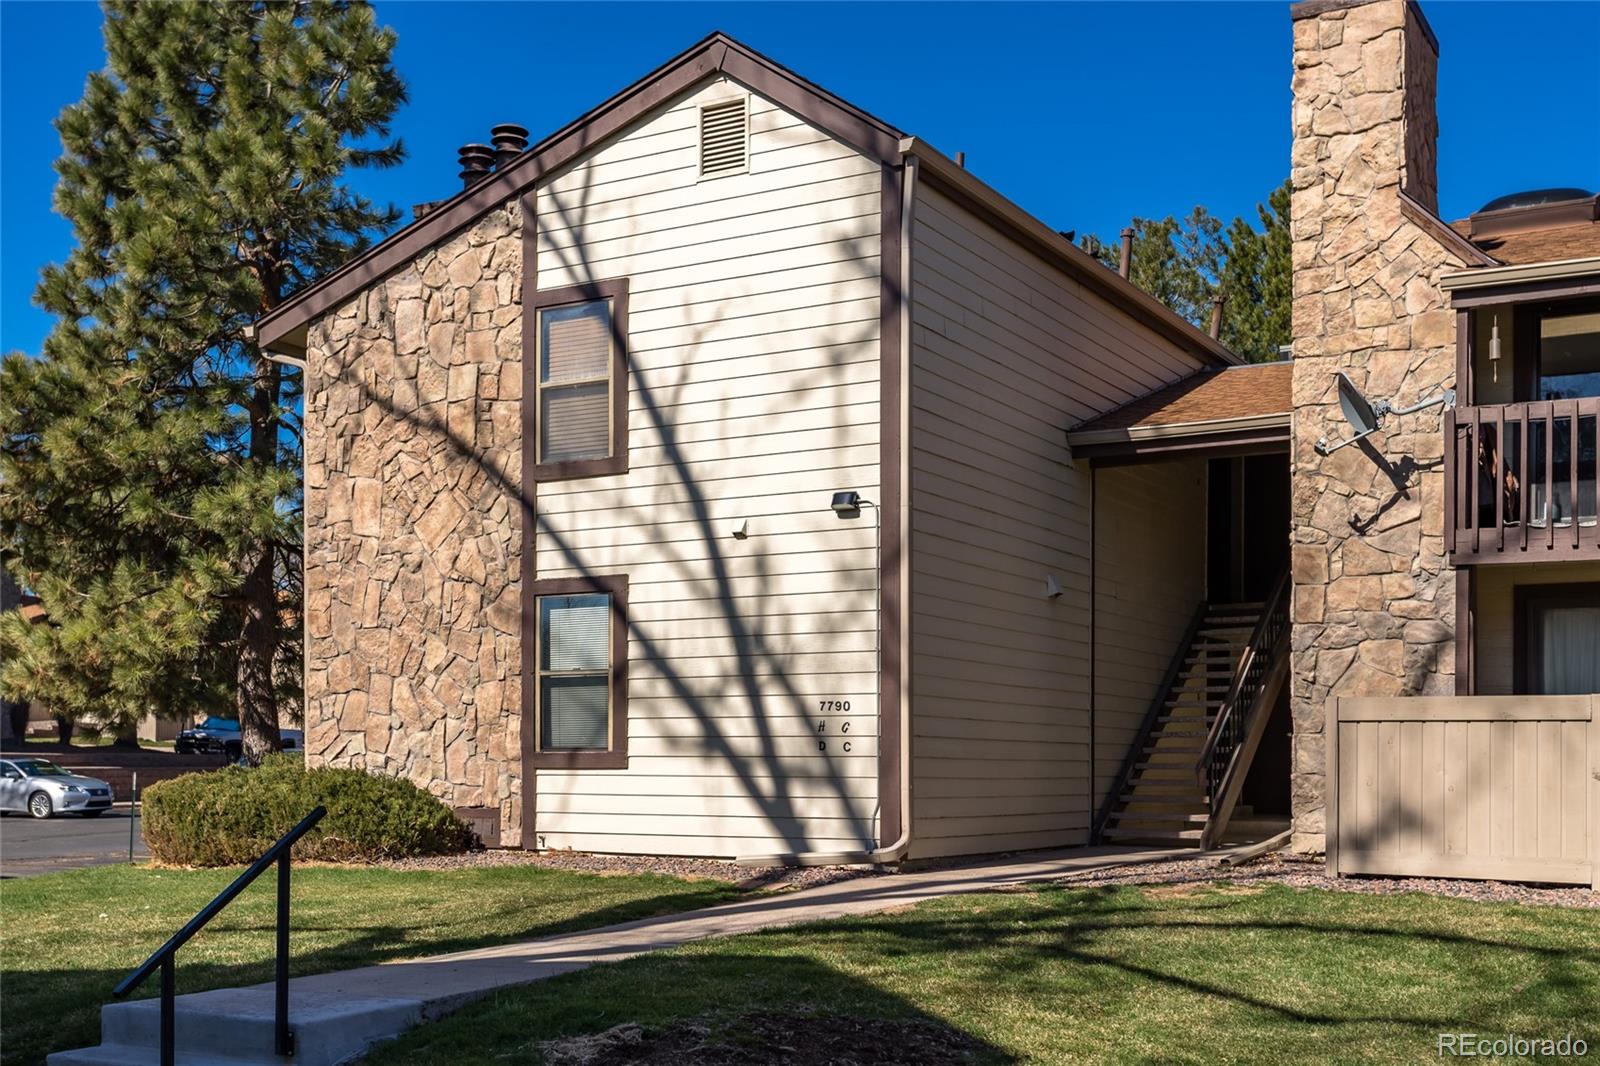 7790 W 87th Drive D, Arvada  MLS: 7628069 Beds: 2 Baths: 2 Price: $325,000